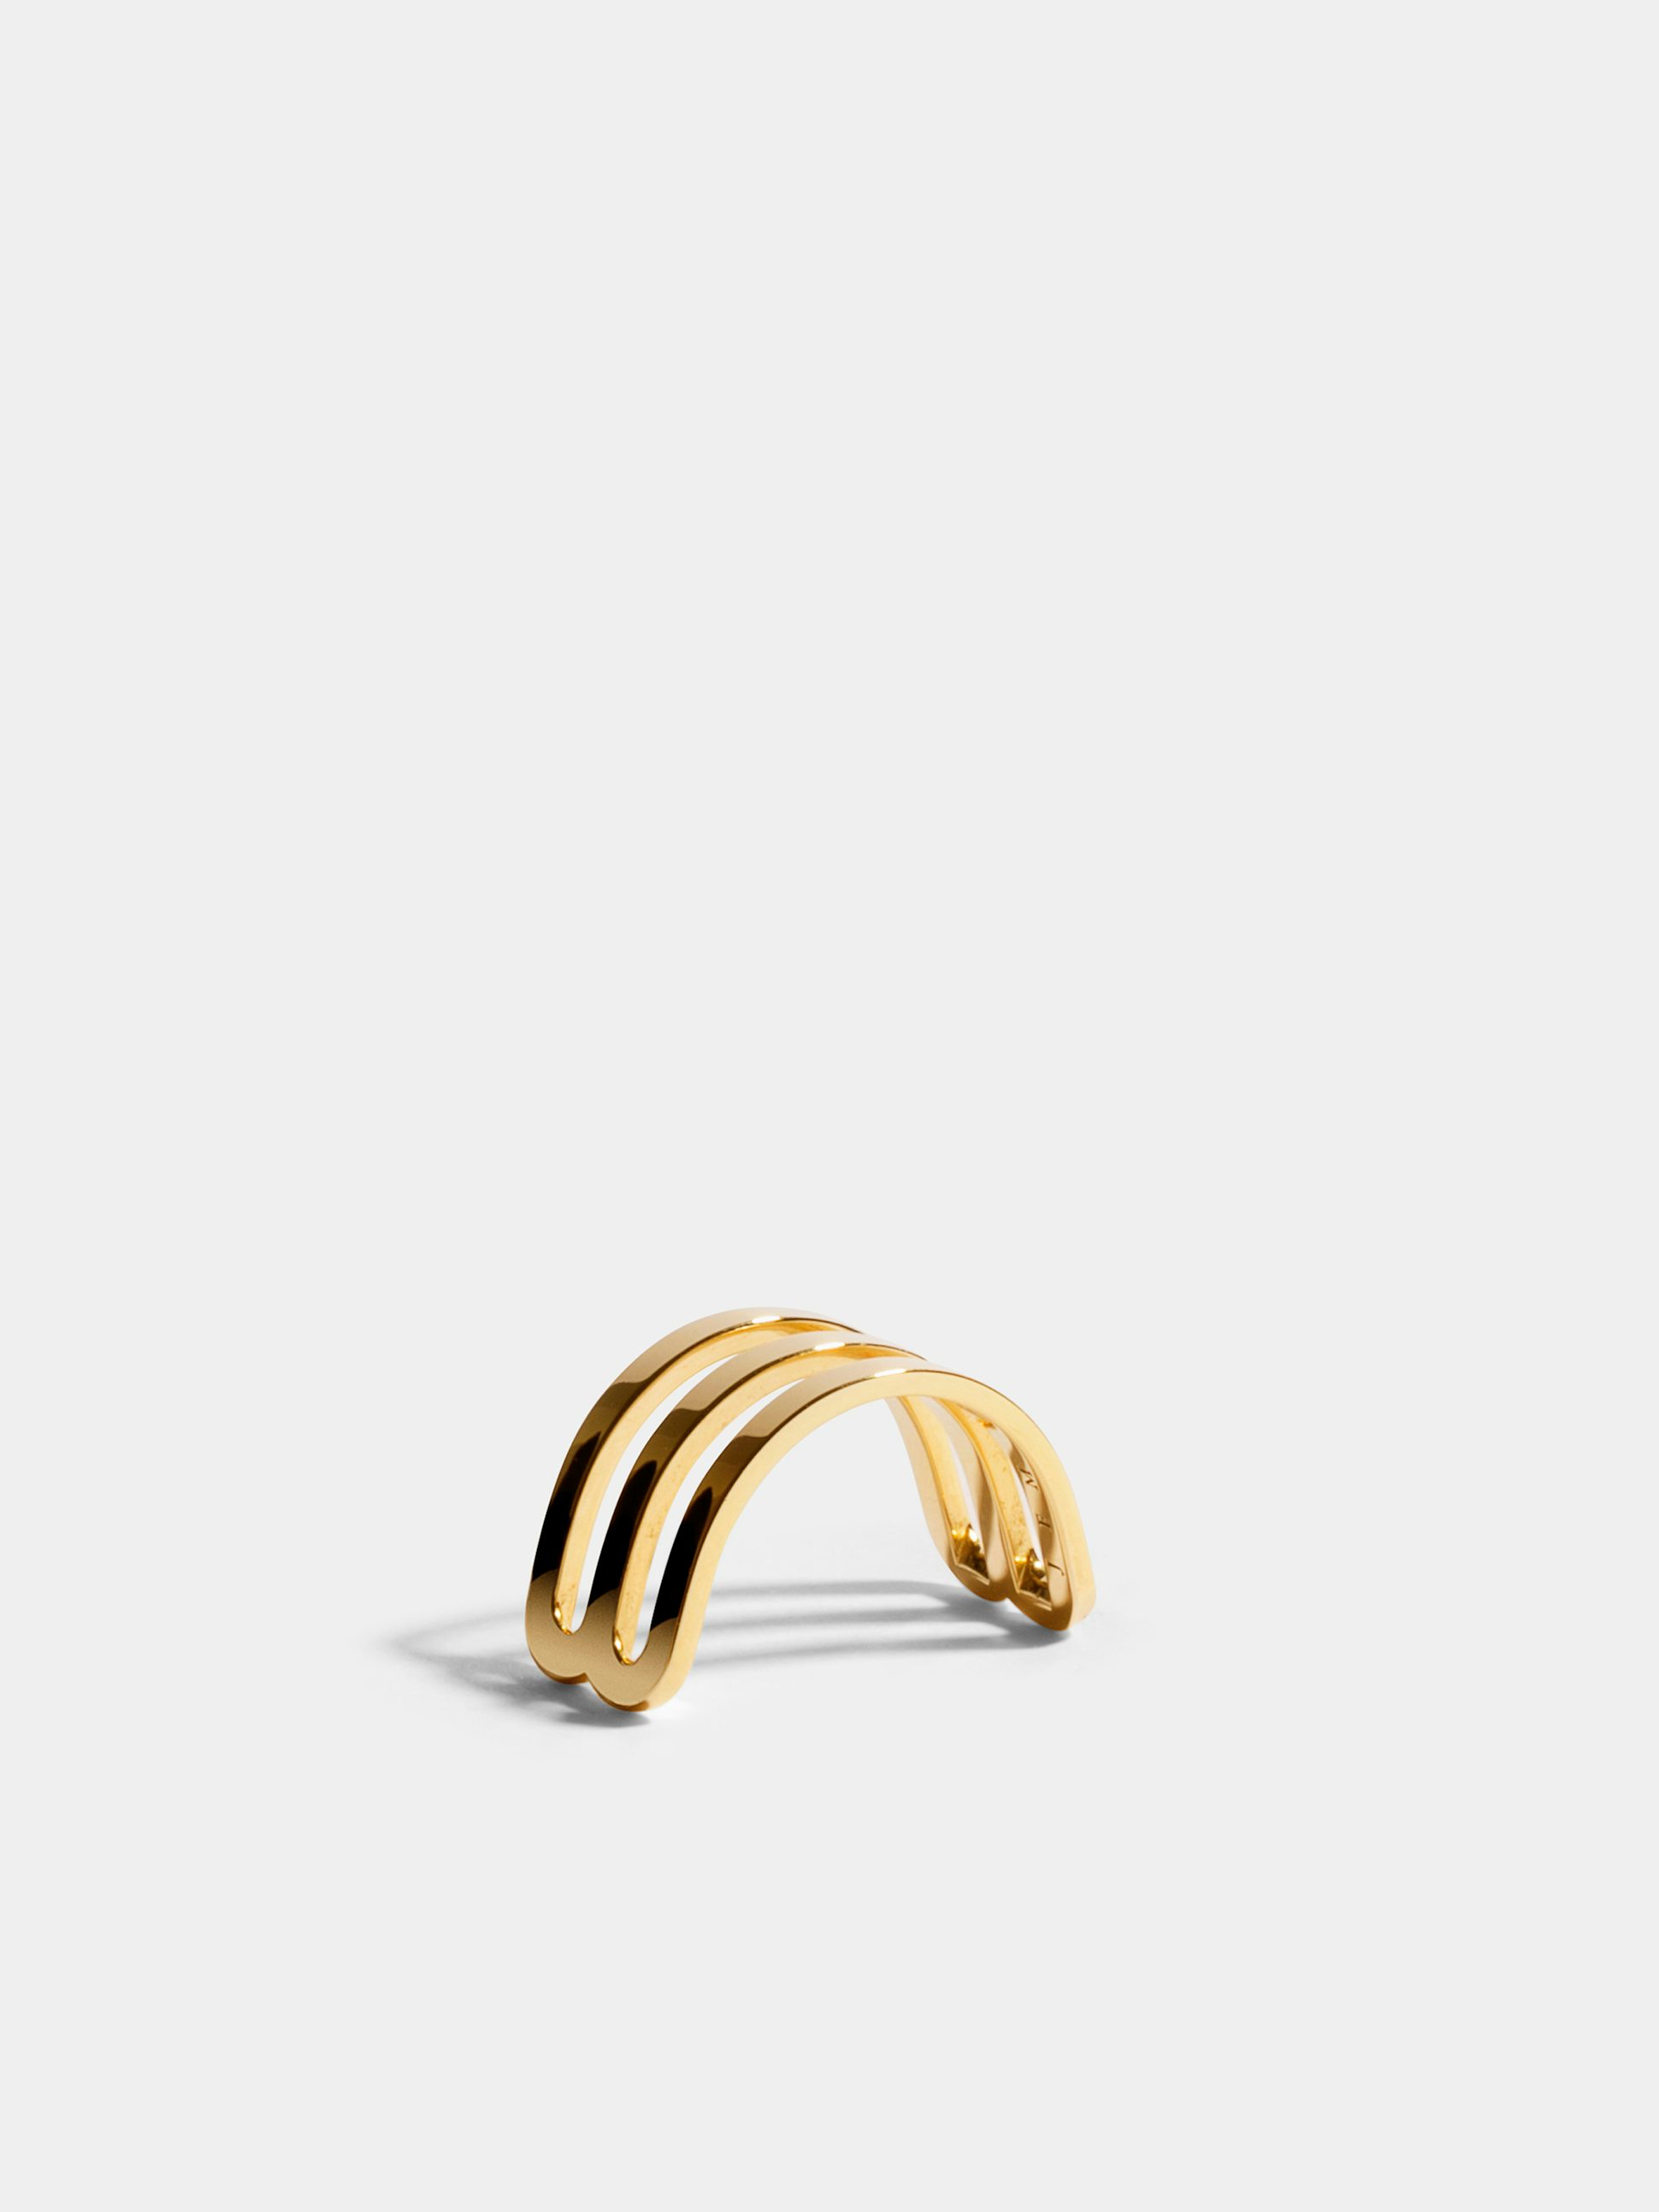 Étreintes double half-ring in 18k Fairmined ethical yellow gold with a polished finish.